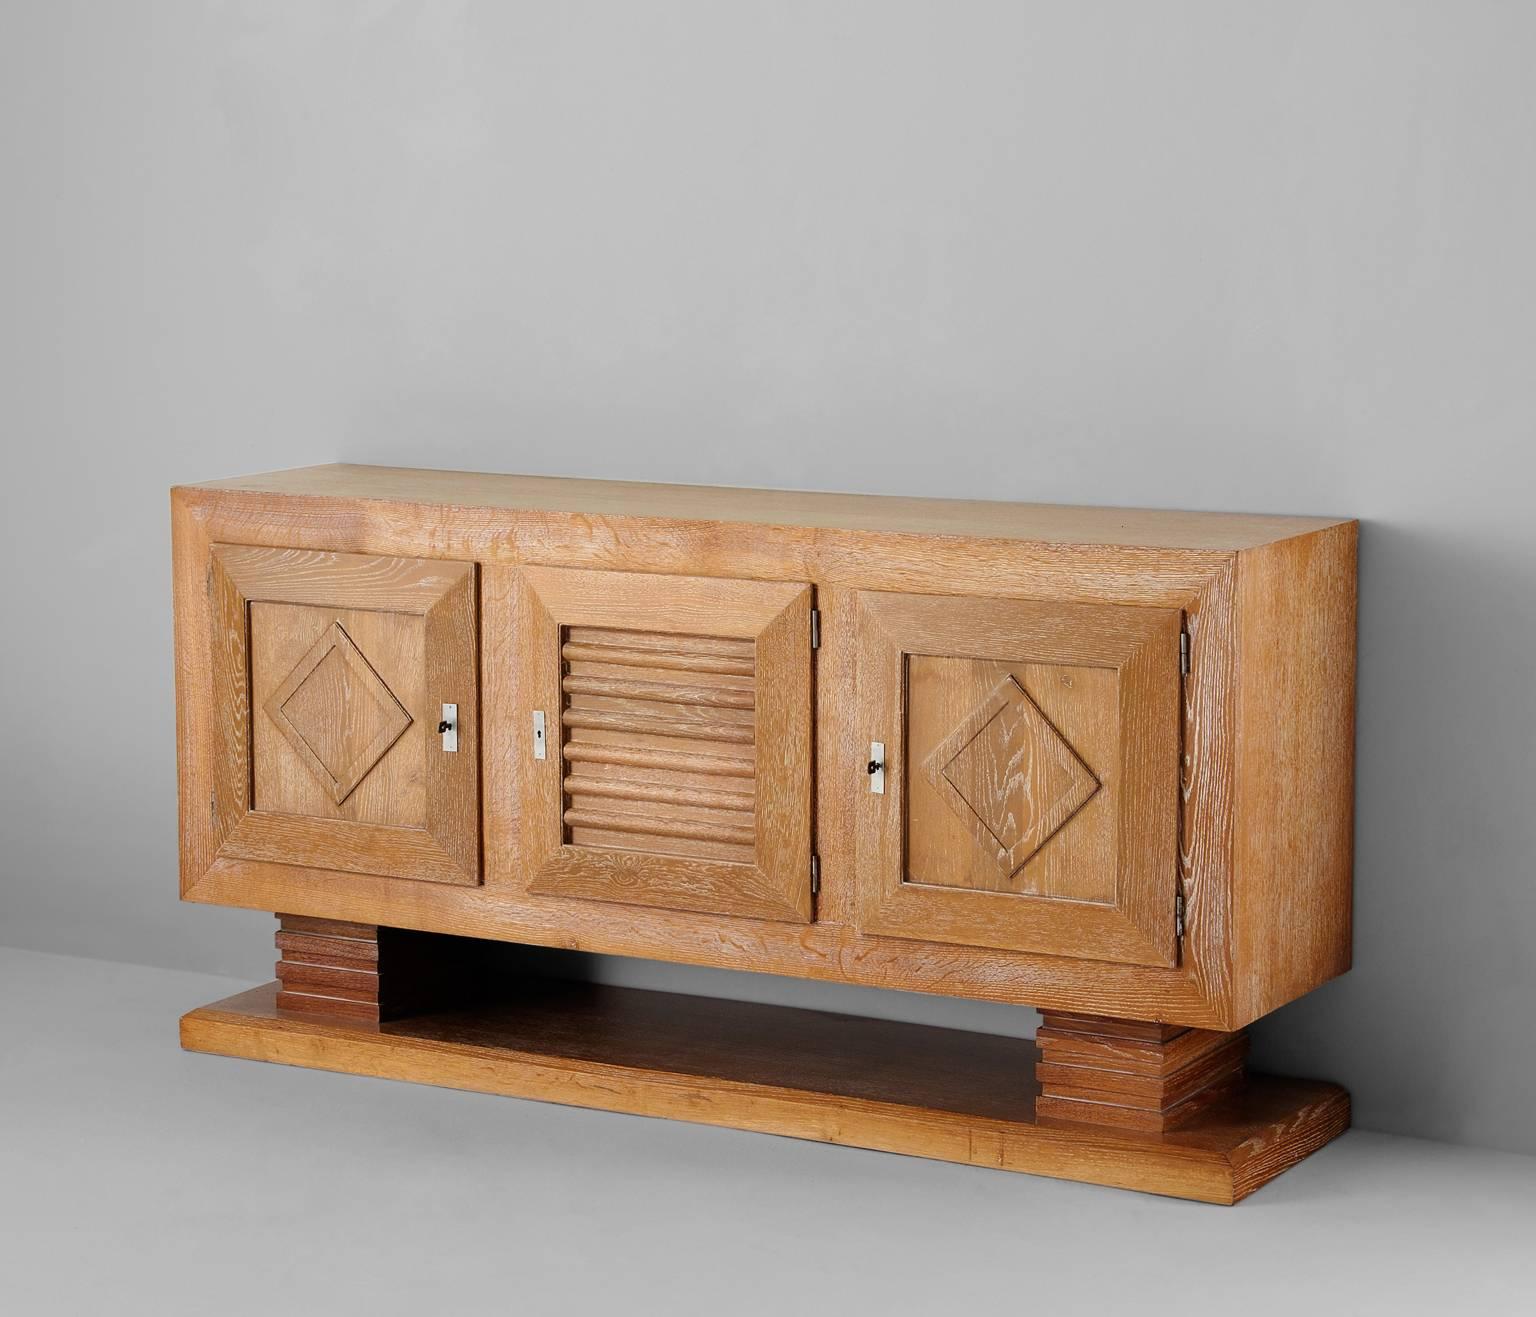 Highly exceptional Art Deco credenza by Charles Dudouyt, France 1940s. 

This buffet is very well crafted in cerused oak, showing an overall white wash look. The storage contains two large compartments with interesting graphically patterned door